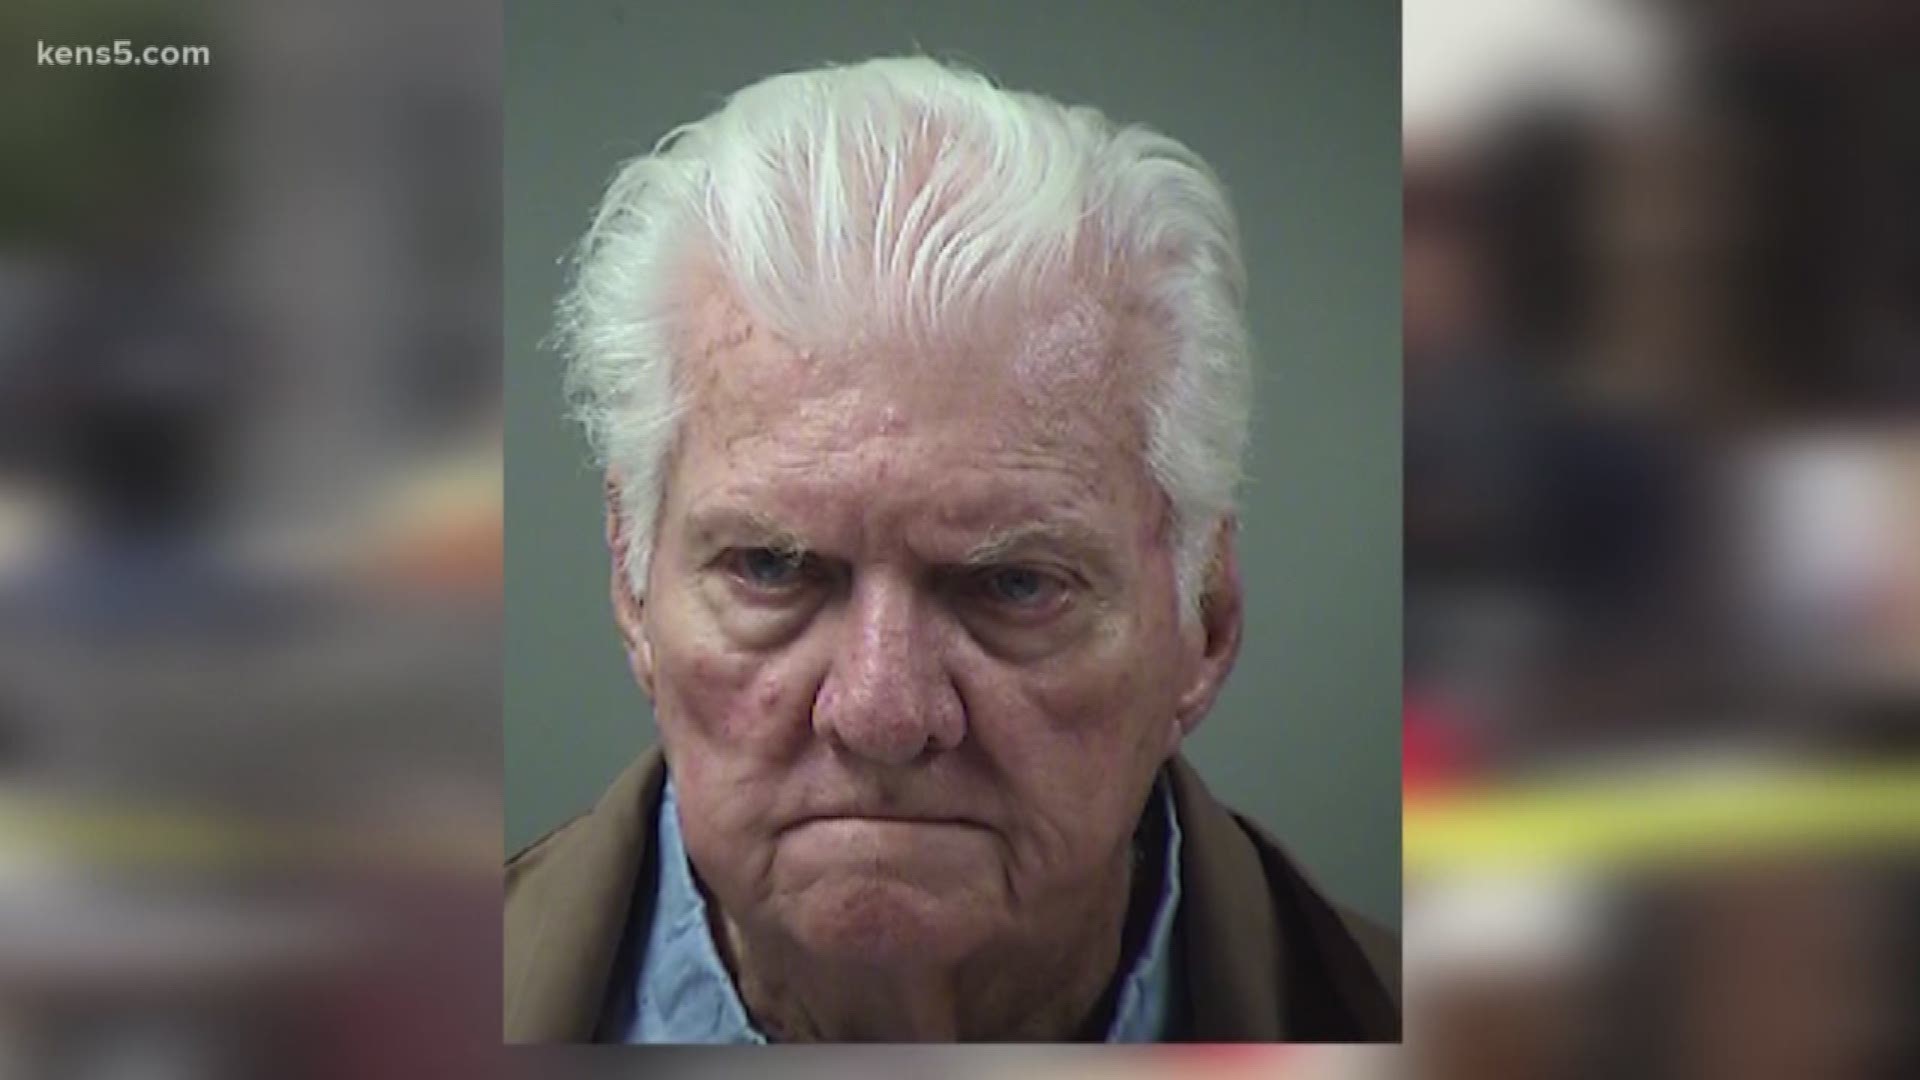 SAPD arrested 89-year-old John Bogard and charged him with murder after they say he ran over a woman multiple times with his vehicle.